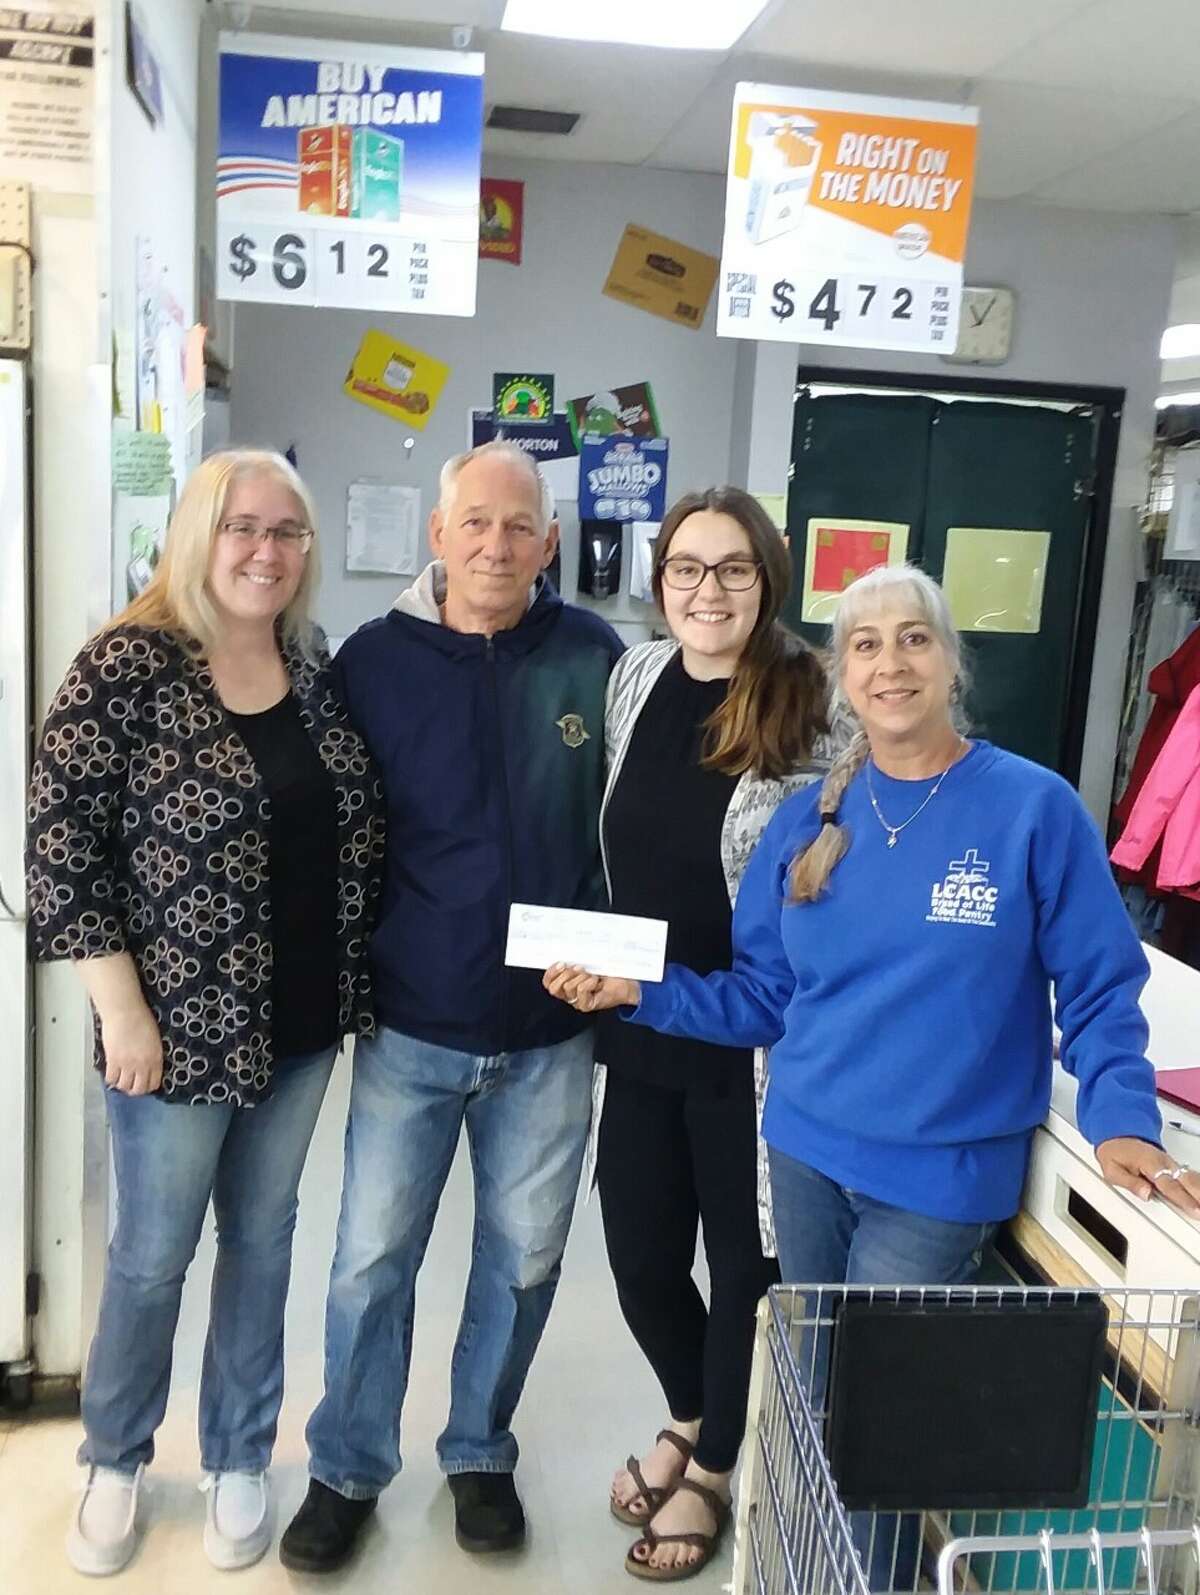 Bread of Life Pantry was presented with a donation of $!,566 from Houseman's "Donate at Checkout" campaign over Memorial Day Weekend. Pictured, left to right, are Darla Brandsetter, Kelly Morton, Gabrie Bolles, and Lynne Mills.  